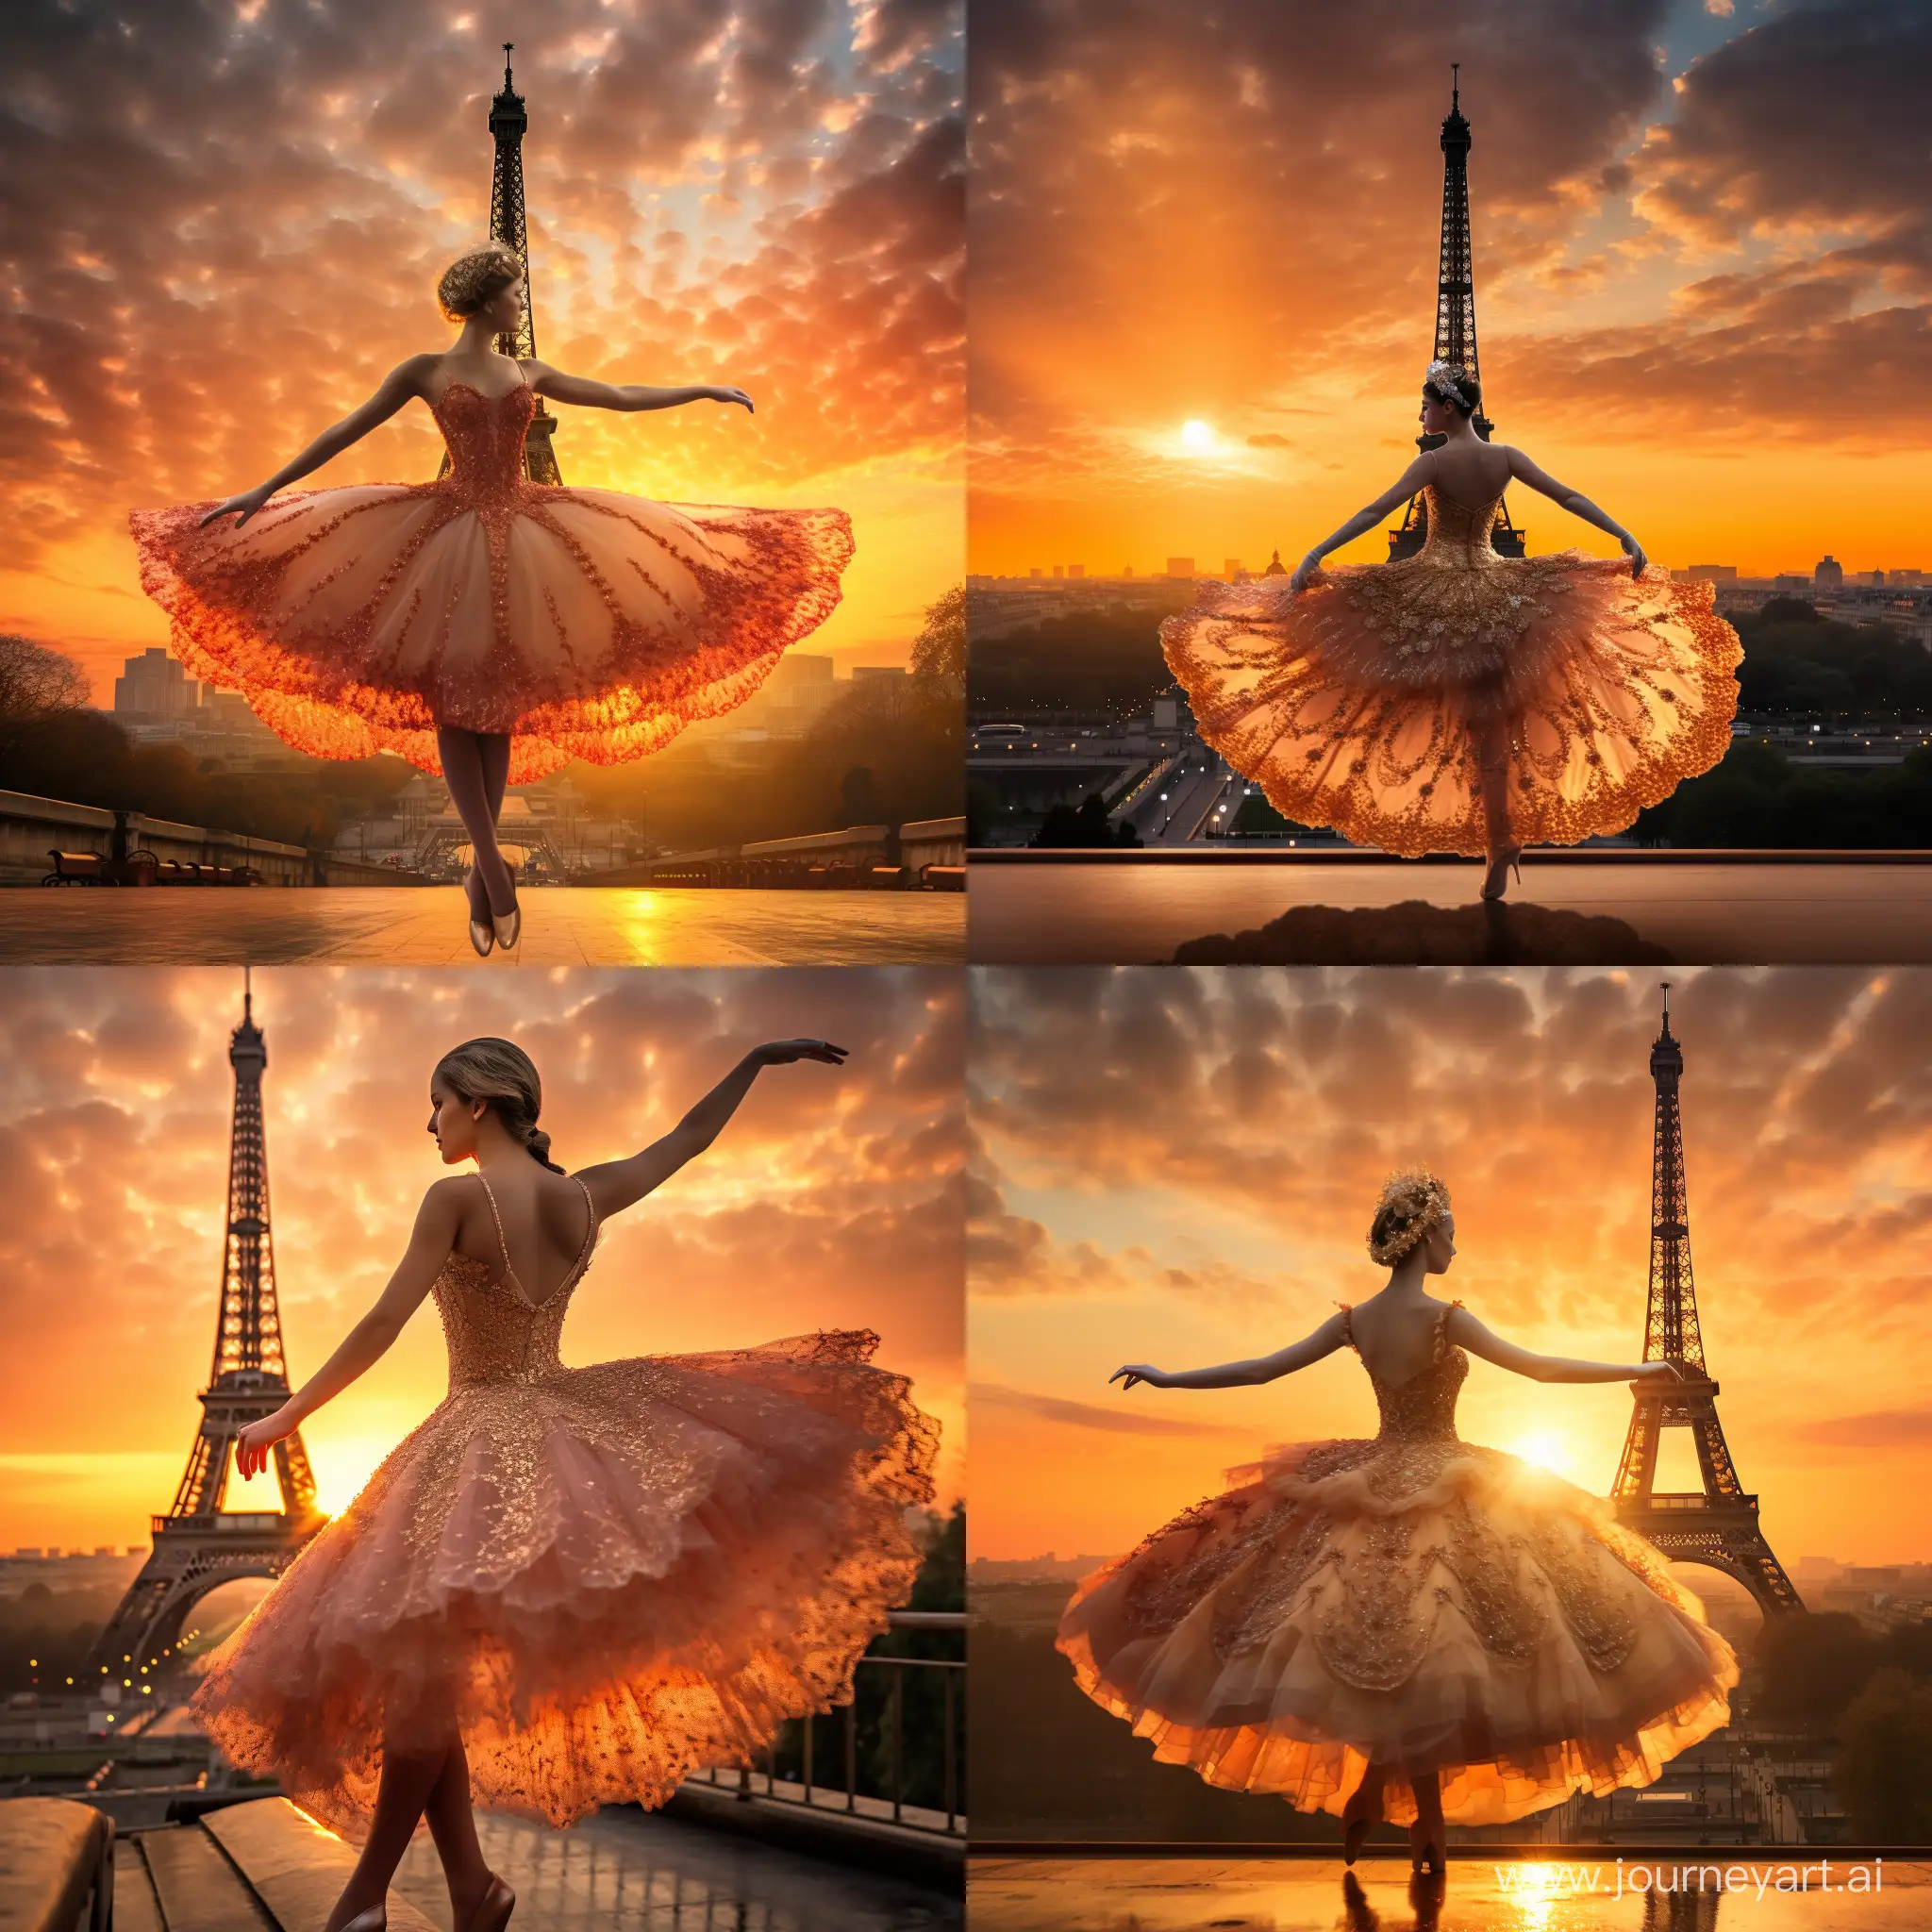 "Create an ultra-high-definition 8K photograph of a professional ballerina en pointe, poised at the very tip of the Eiffel Tower. The time is golden hour, with the sun casting a warm, illuminating glow that highlights the intricate details of the ballerina's costume and the Eiffel Tower's structure. The colors are vibrant and rich, capturing the ballerina's grace against the backdrop of a multicolored sky that transitions from warm oranges and pinks to cool blues and purples. Every detail should be captured with extreme clarity, from the texture of the ballerina's tutu to the individual iron lattices of the tower, akin to the quality of an image taken with a Sigma lens. The depth of field should be wide, ensuring both the ballerina and the distant horizon are in sharp focus, encapsulating the magnificence of the Parisian landscape during this magical hour."